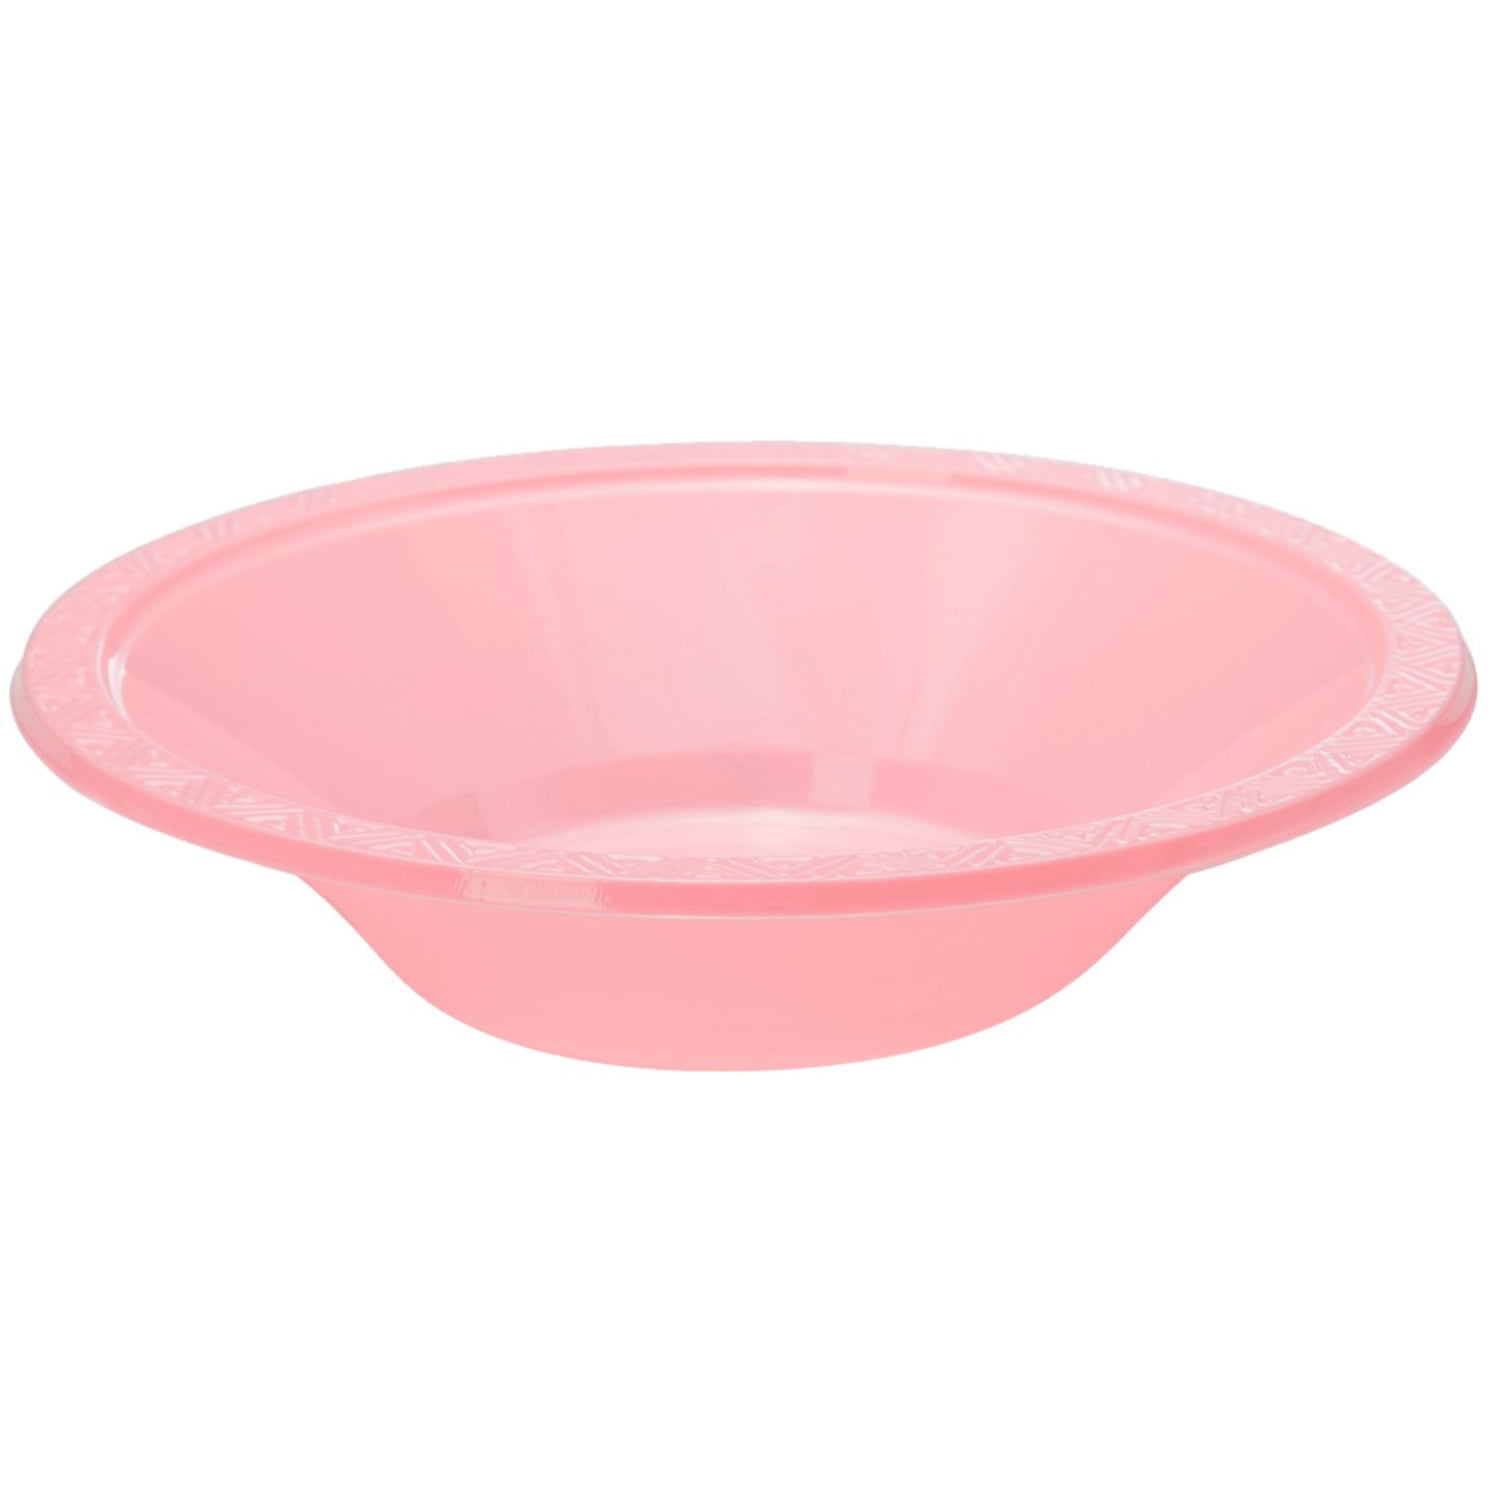 12 x PINK PLASTIC BOWLS 12oz DISPOSABLE PARTIES PARTY SUPPLIES TABLEWARE WEDDING 